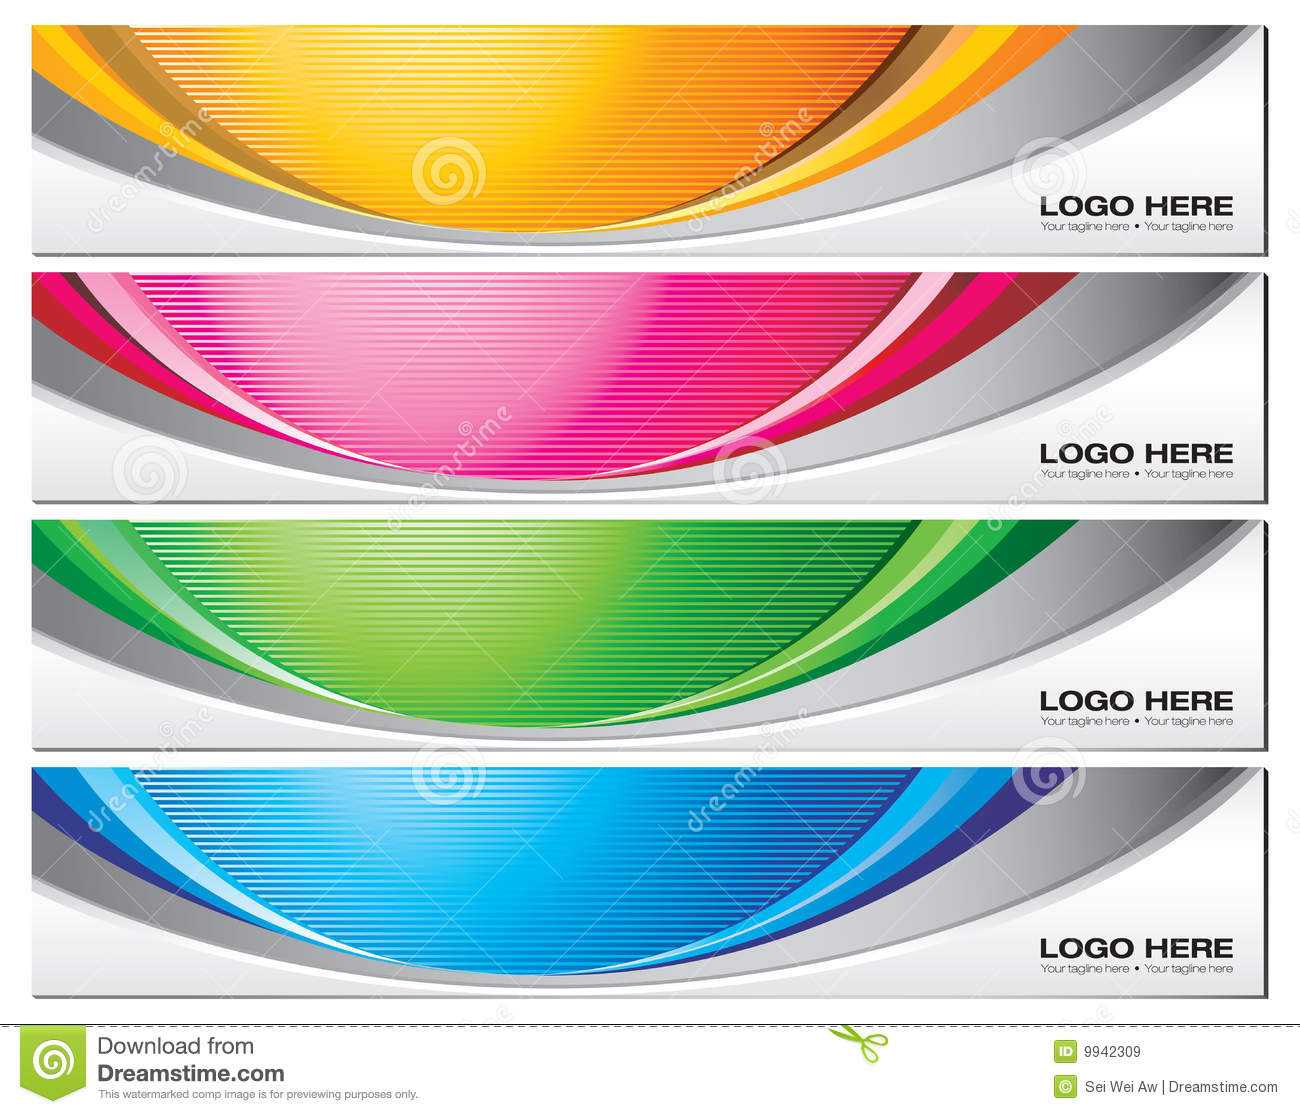 Banner Templates Stock Vector. Illustration Of Vector - 9942309 Within Free Online Banner Templates